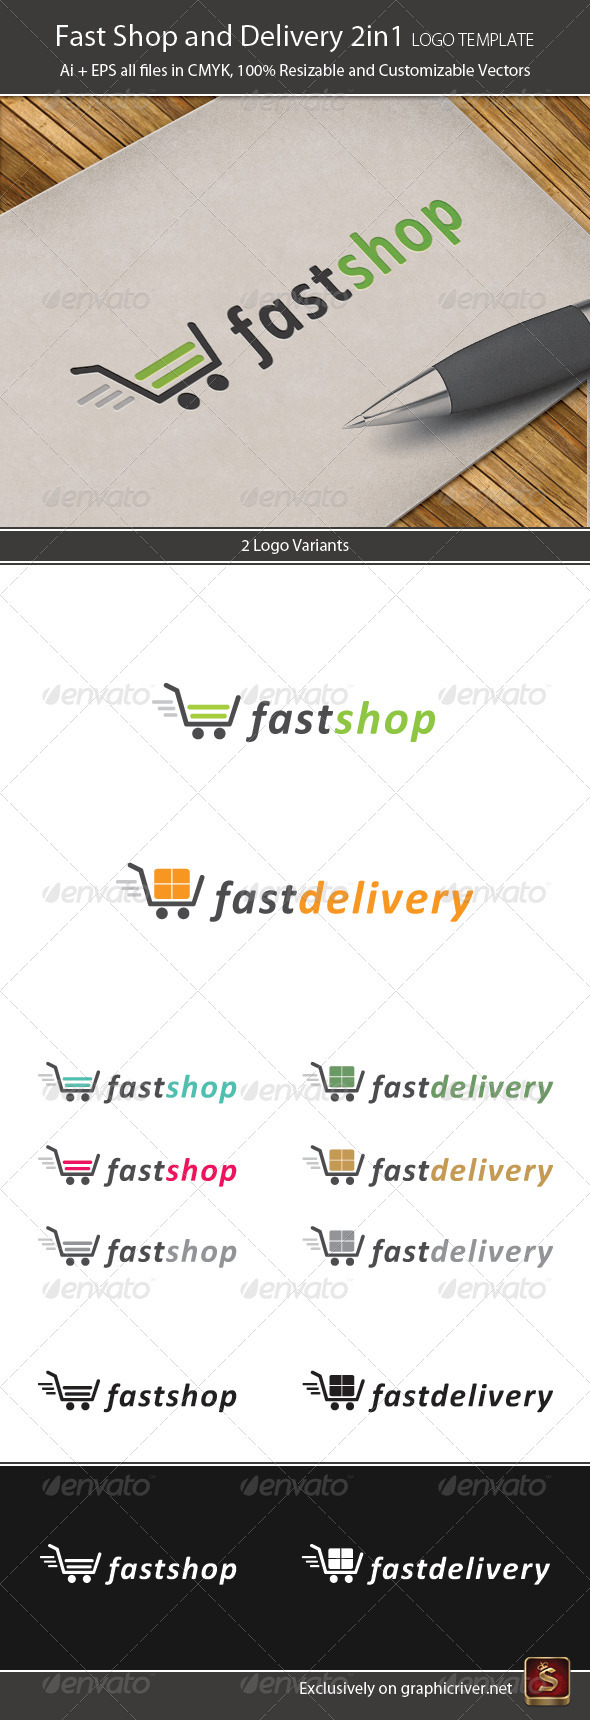 Fast Shop And Delivery 2in1 Logo Template